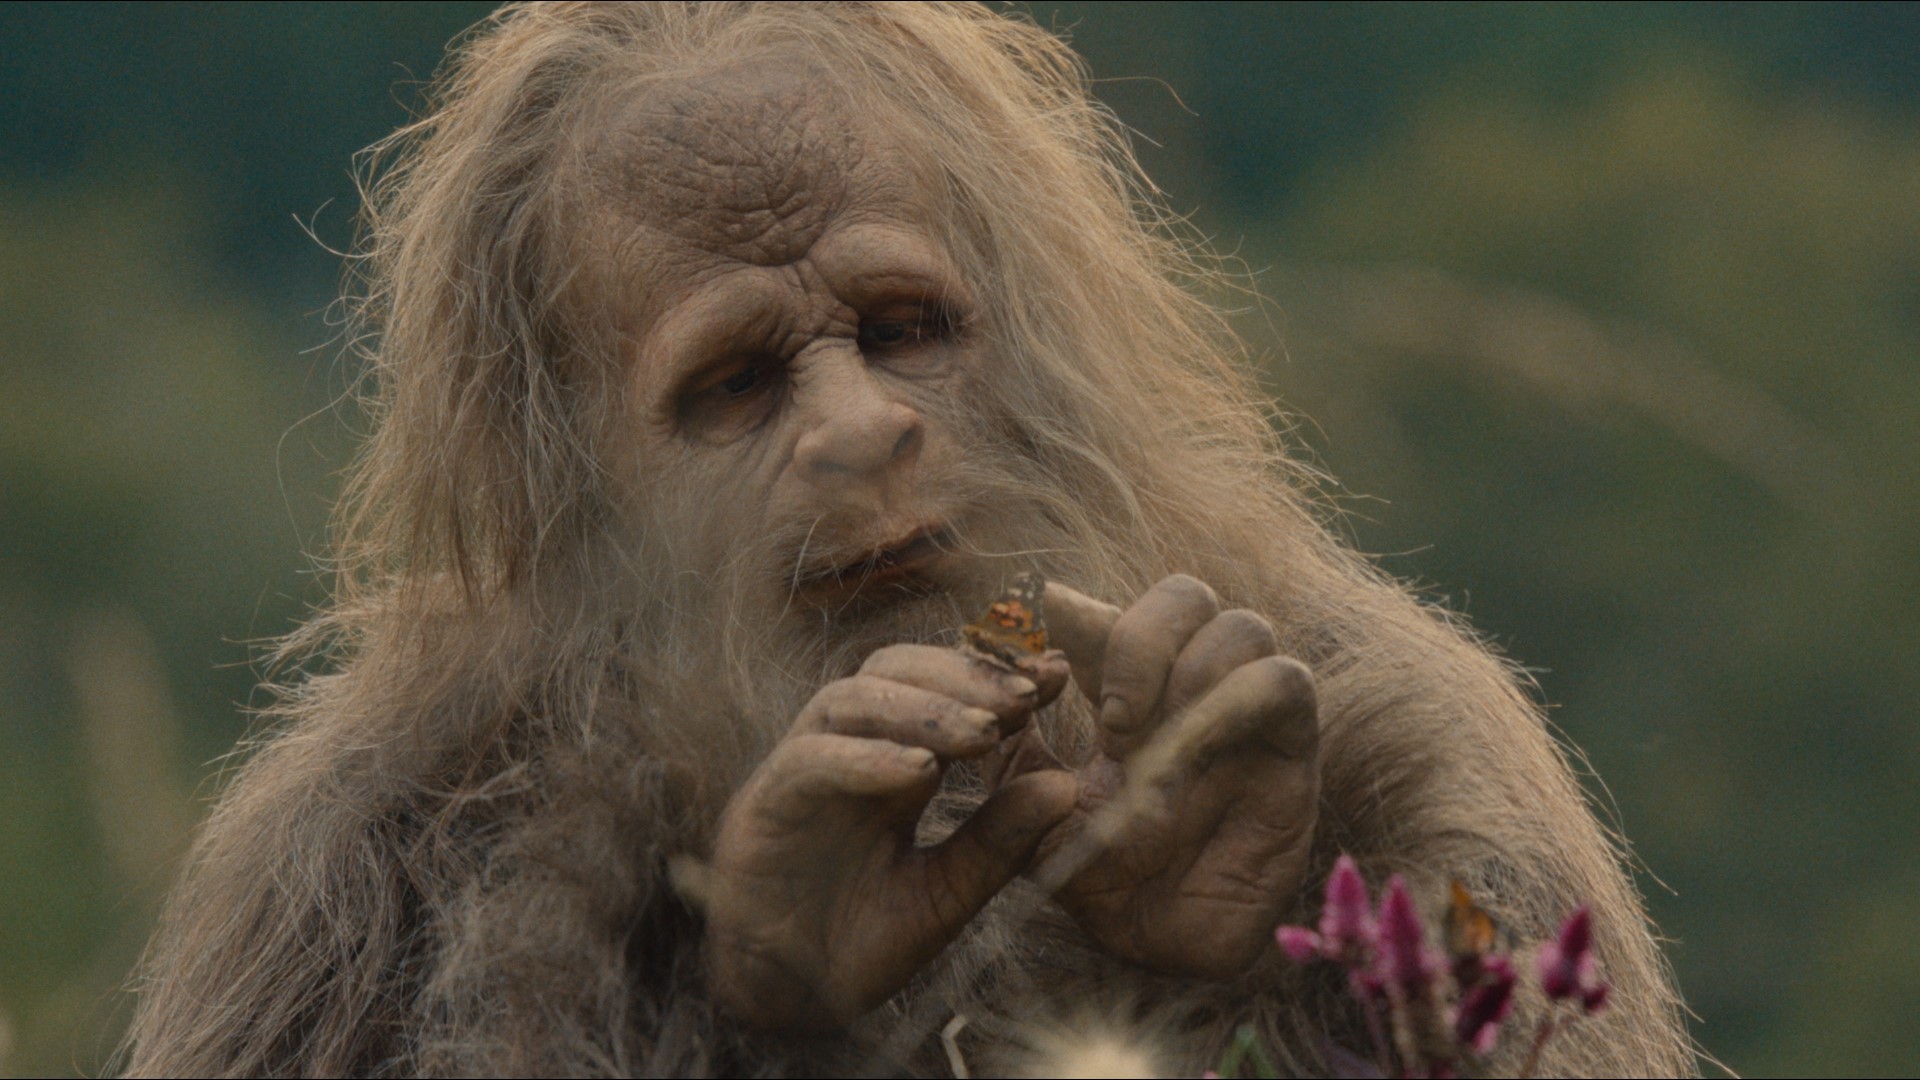 The R-rated, no-holds-barred film stars Jesse Eisenberg and Riley Keough as members of a Sasquatch pack. #k5evening